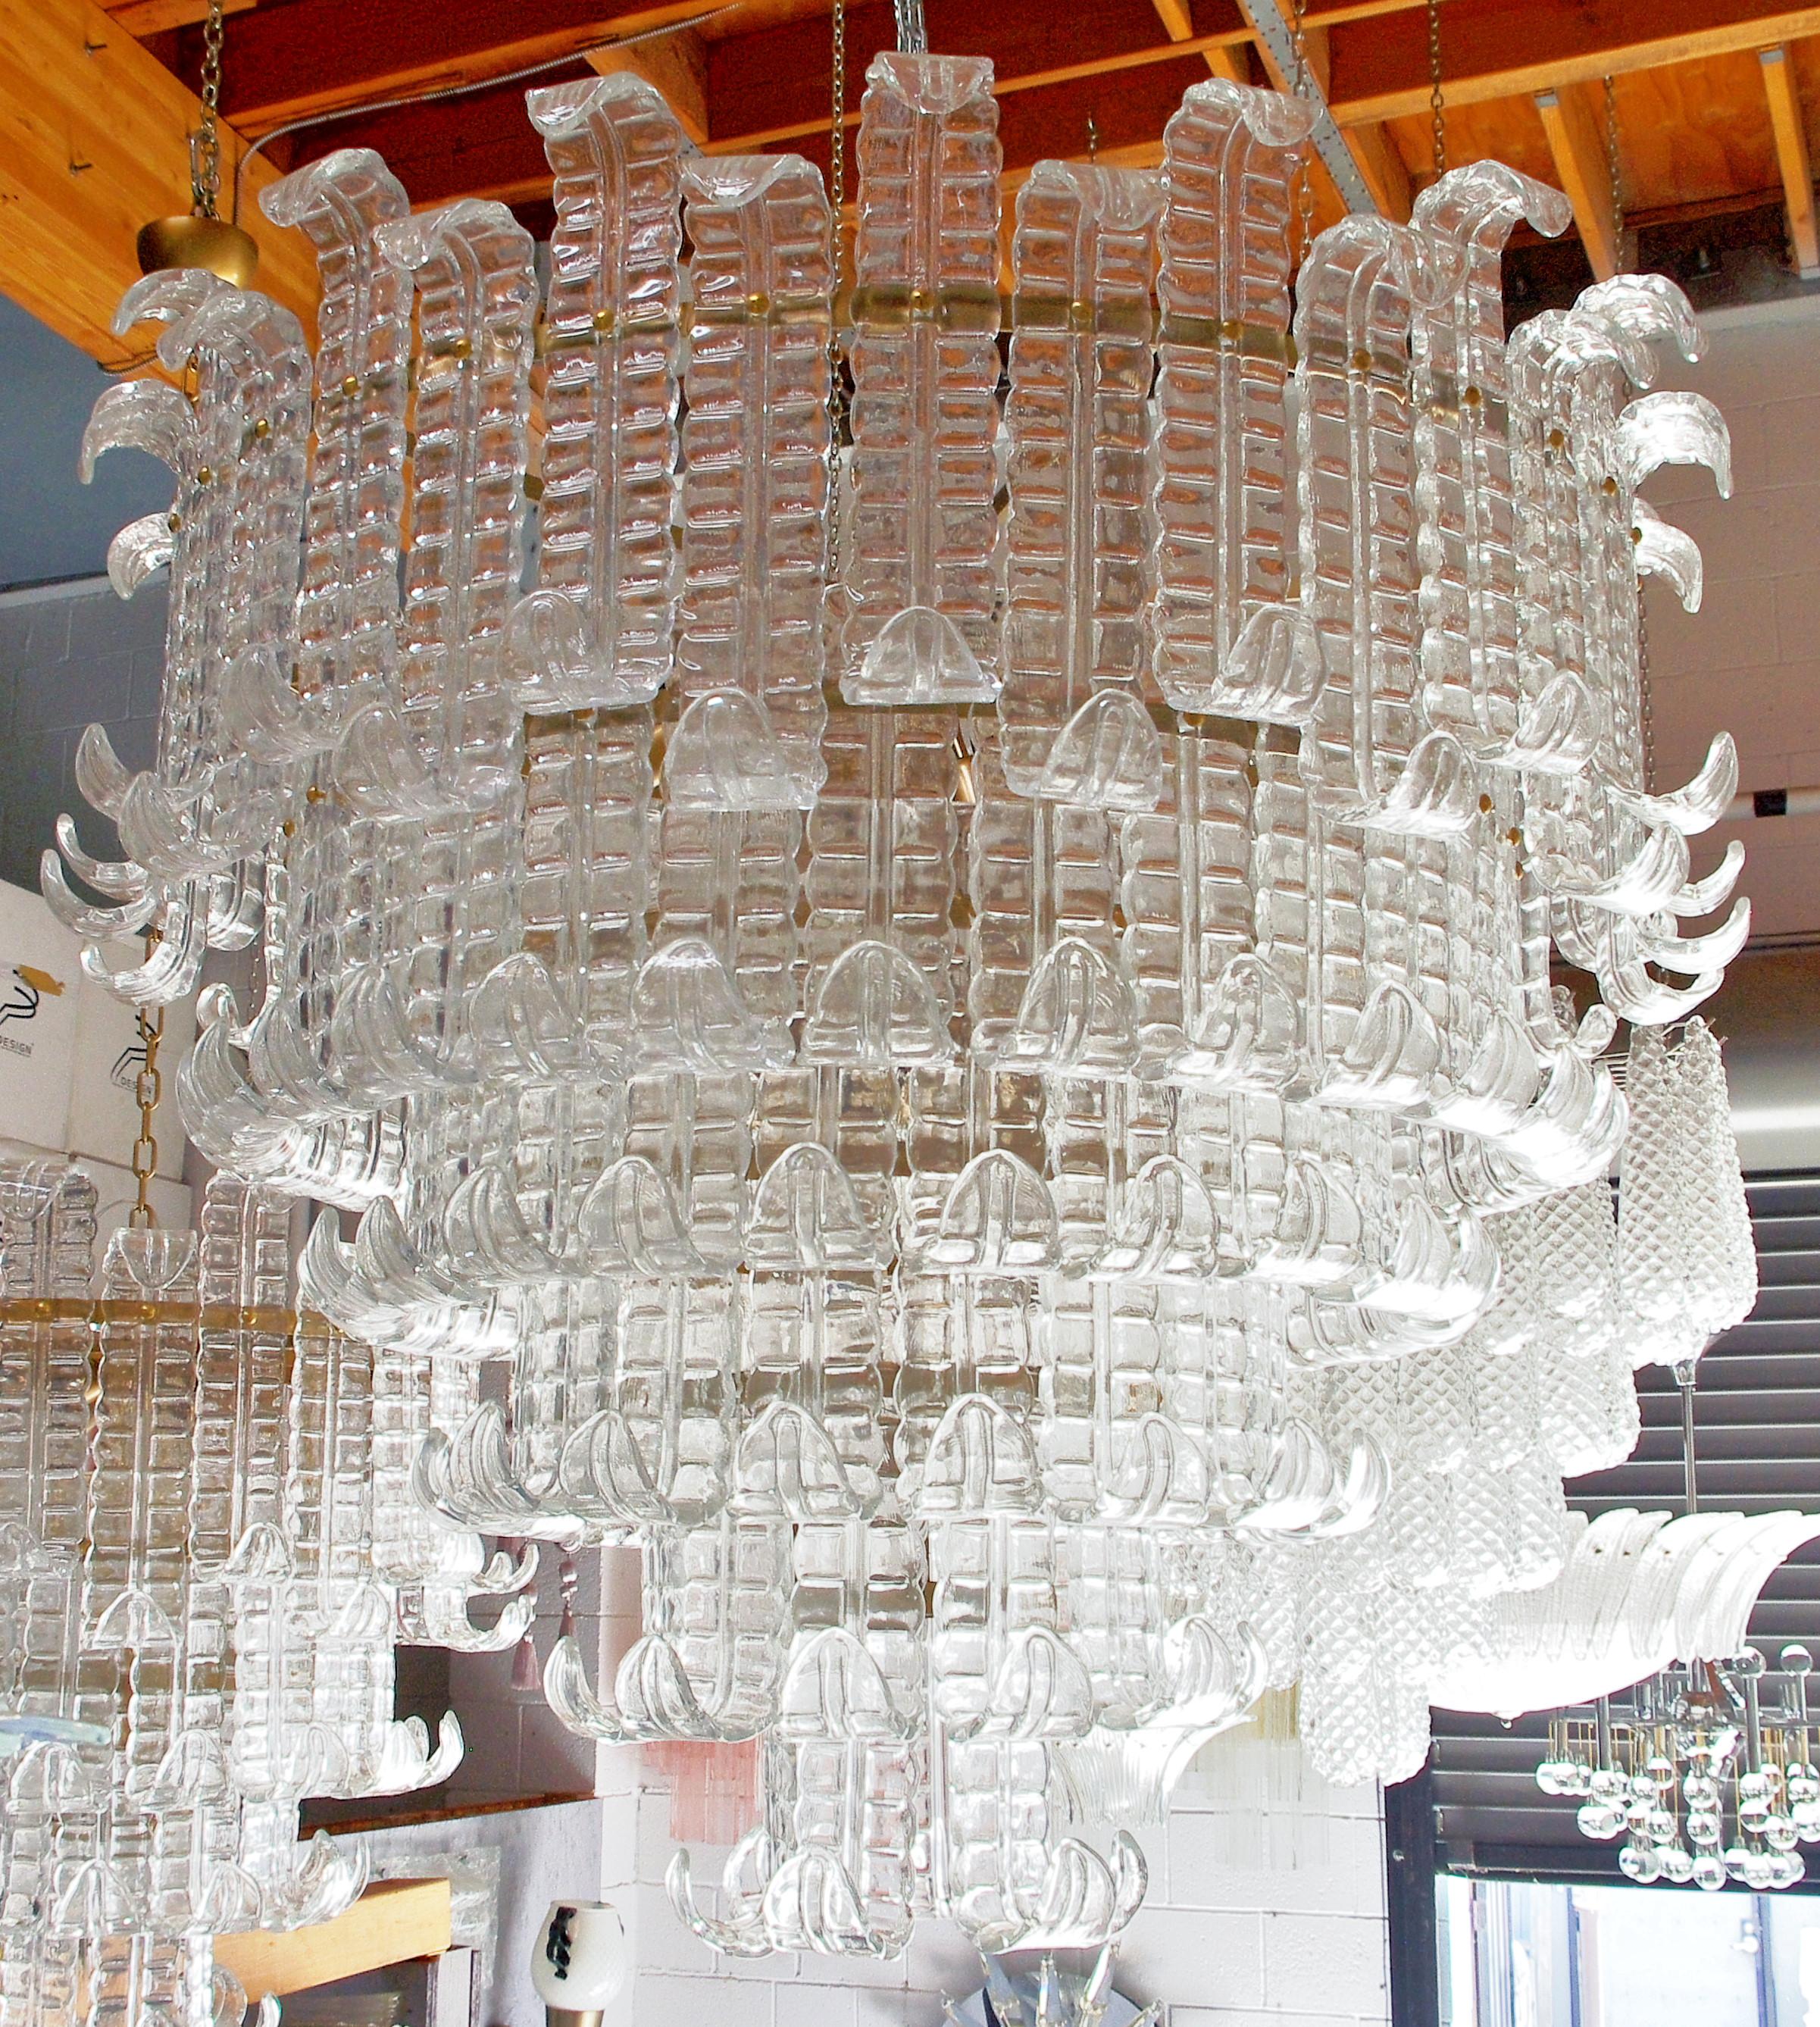 Italian chandelier shown with six tiers of clear hand blown Murano Felci fern glasses mounted on bronzed finish metal frame, by Fabio Ltd / Made in Italy
22 lights / E26 or E27 type / max 60W each
Diameter: 43.5 inches / Height: 39.5 inches plus